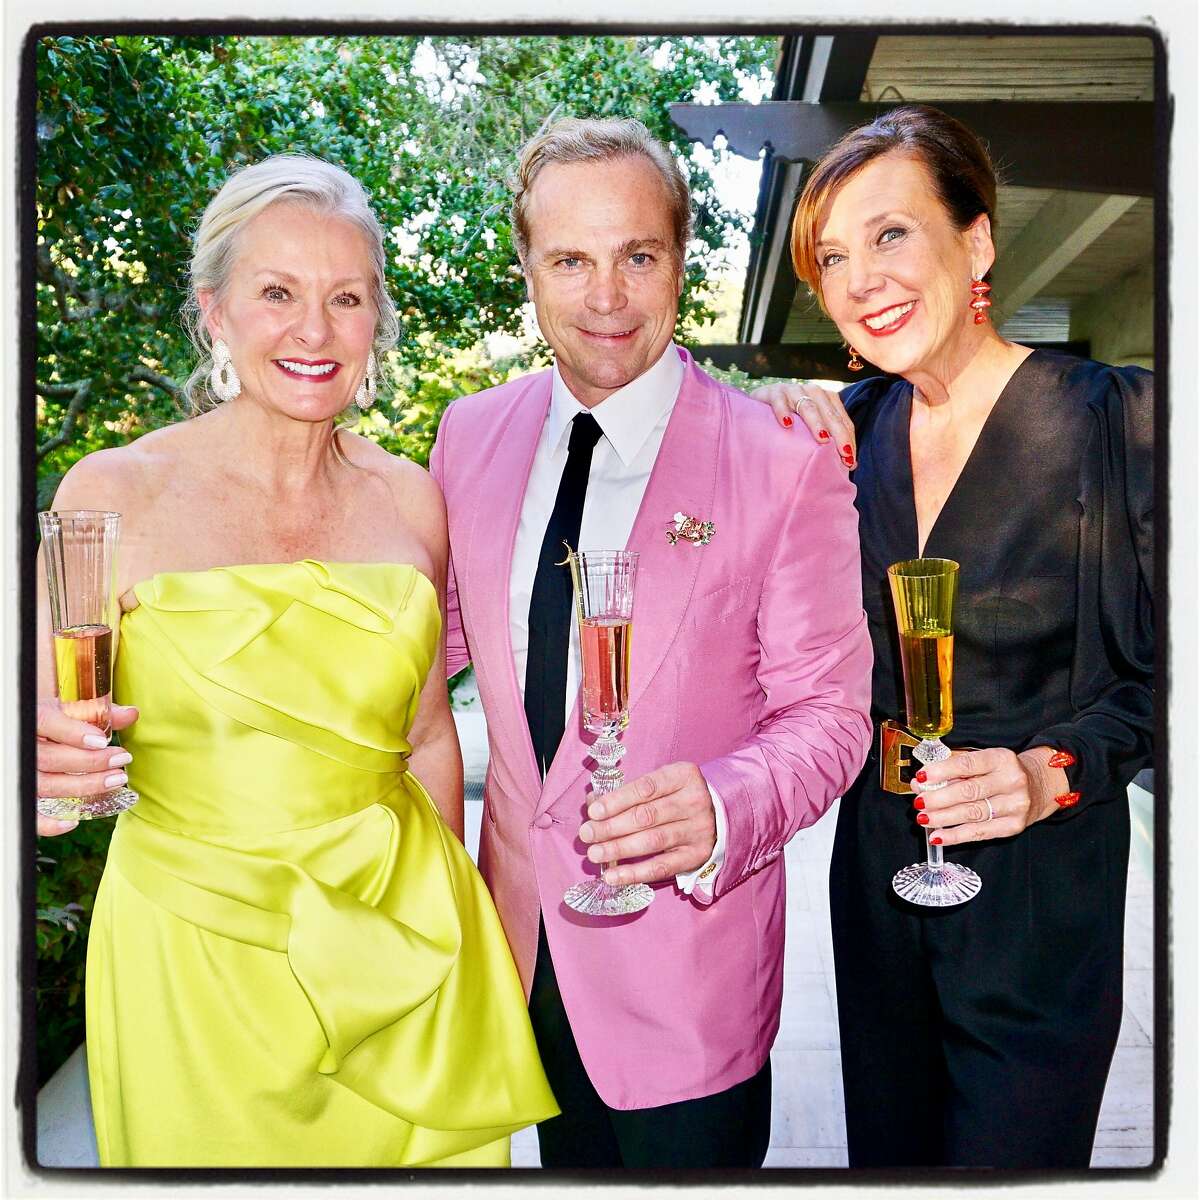 Winemaker Beth Nickel (left) with vintners Jean-Charles Boisset and Gina Gallo at the Rubin Singer fashion event. Aug. 2, 2017.